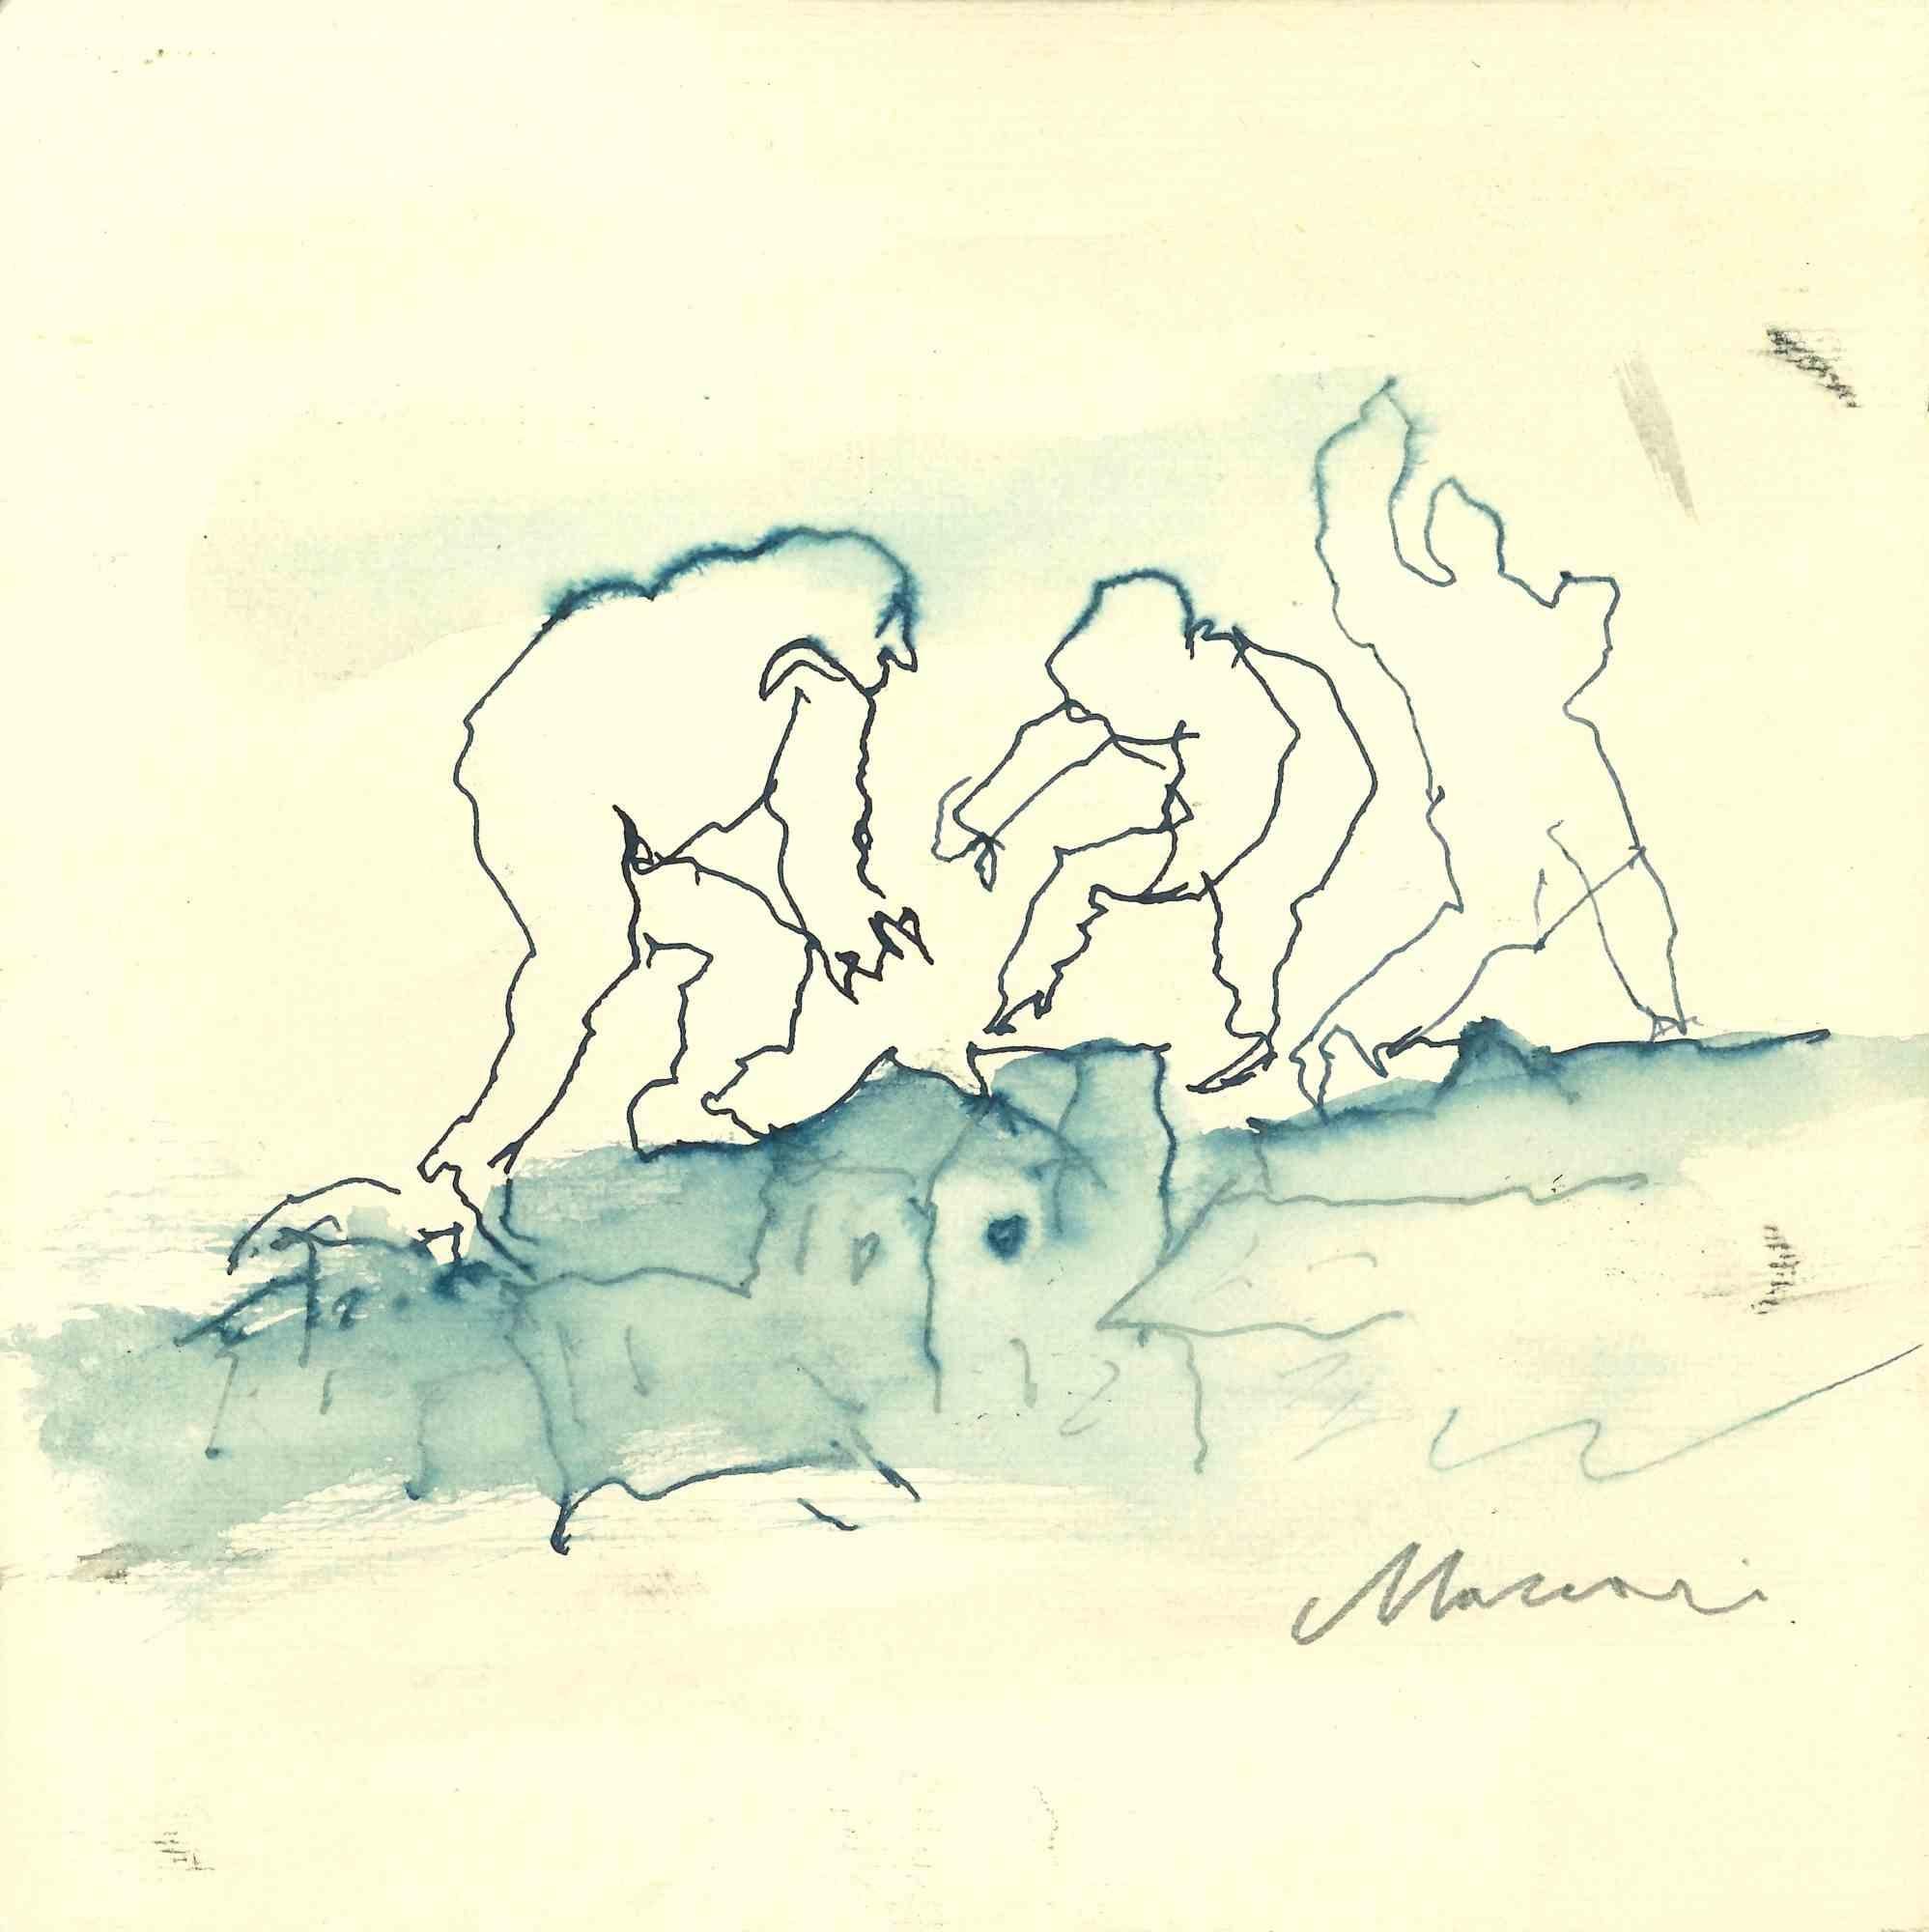 Dance is an ink and watercolor drawing realized by Mino Maccari  (1924-1989) in the Mid-20th Century.

Hand-signed.

Good conditions with slight foxing.

Mino Maccari (Siena, 1924-Rome, June 16, 1989) was an Italian writer, painter, engraver and